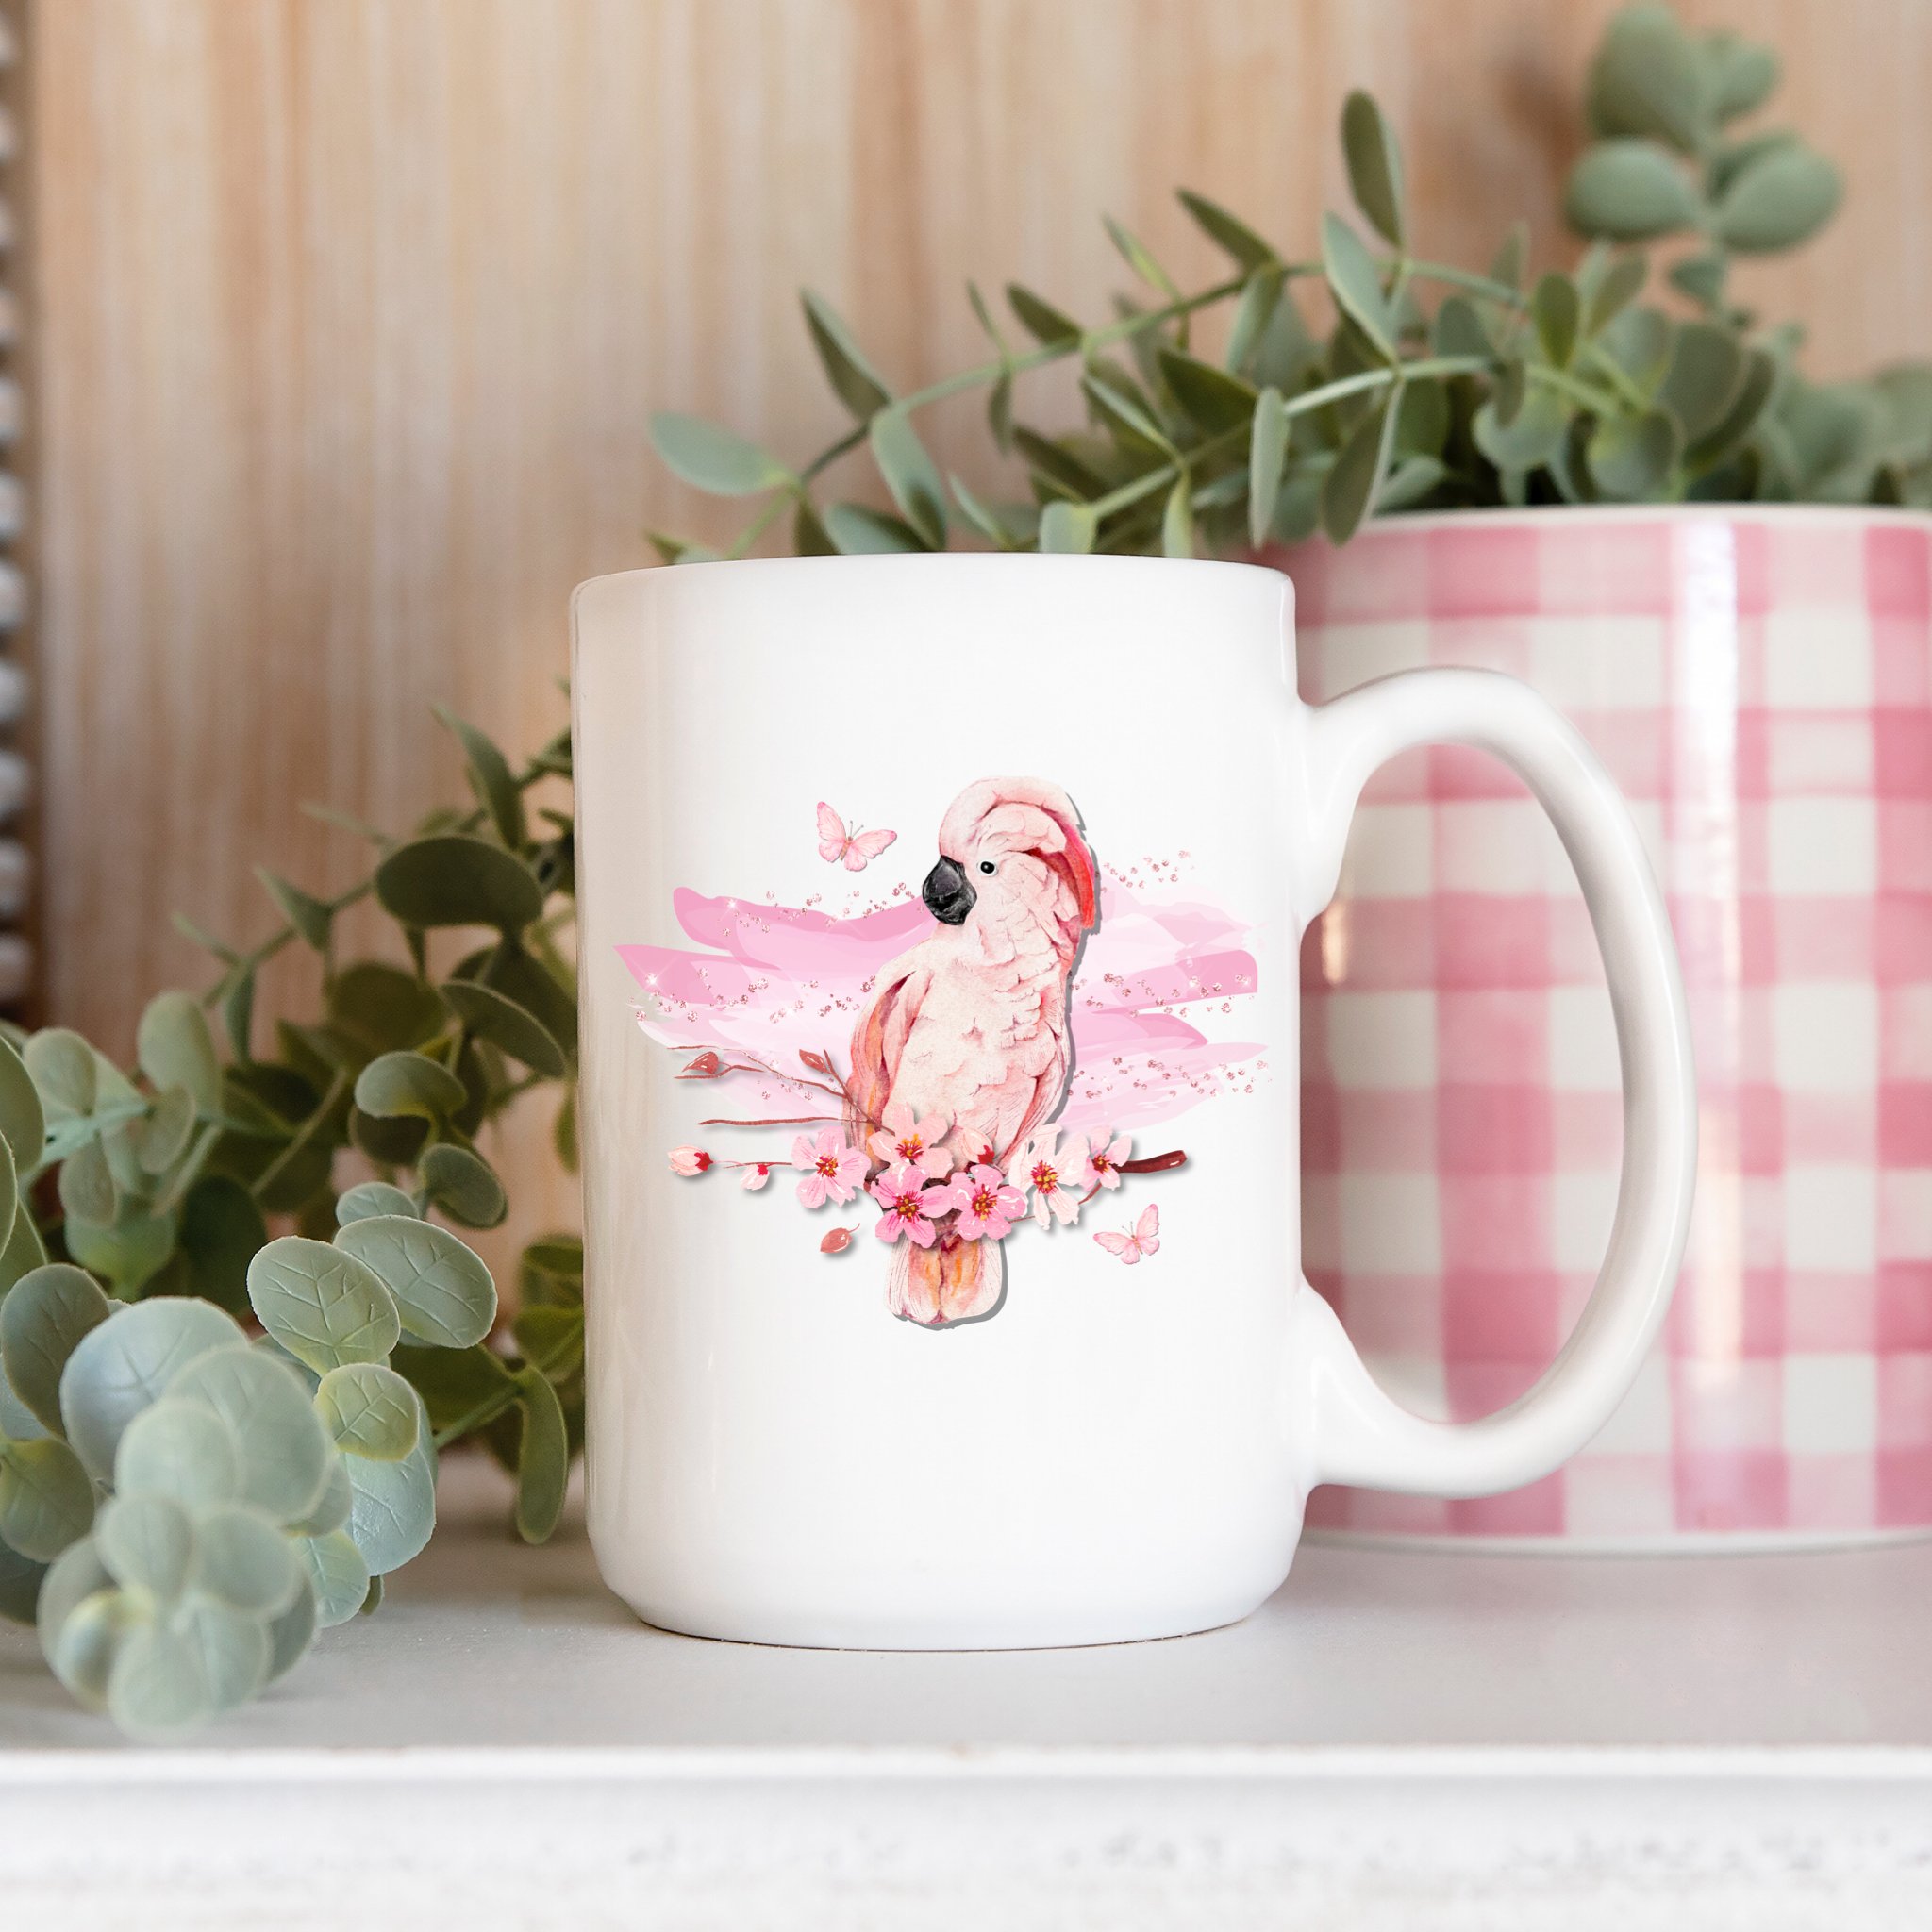 Big white tea cup with pink cockatoo.